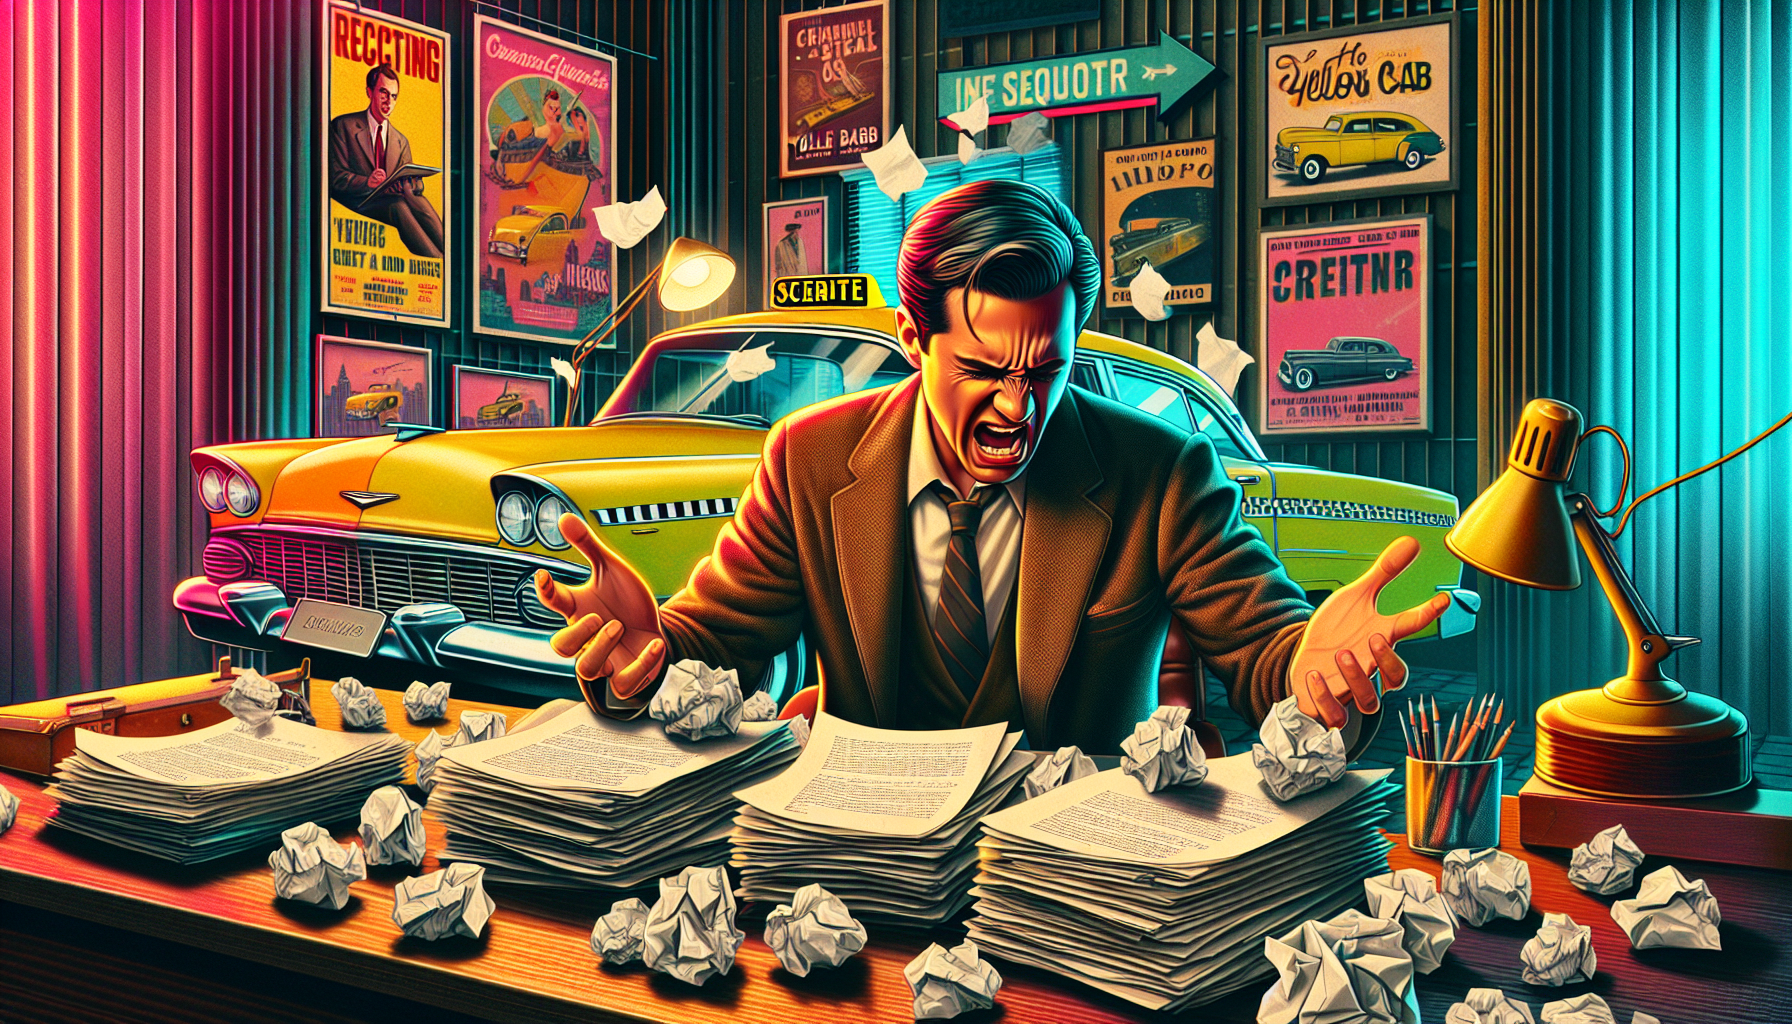 Digital artwork depicting a frustrated Paul Schrader in a dimly lit vintage office, surrounded by crumpled paper and posters of the original 'Taxi Driver' movie, vehemently rejecting scripts and ideas